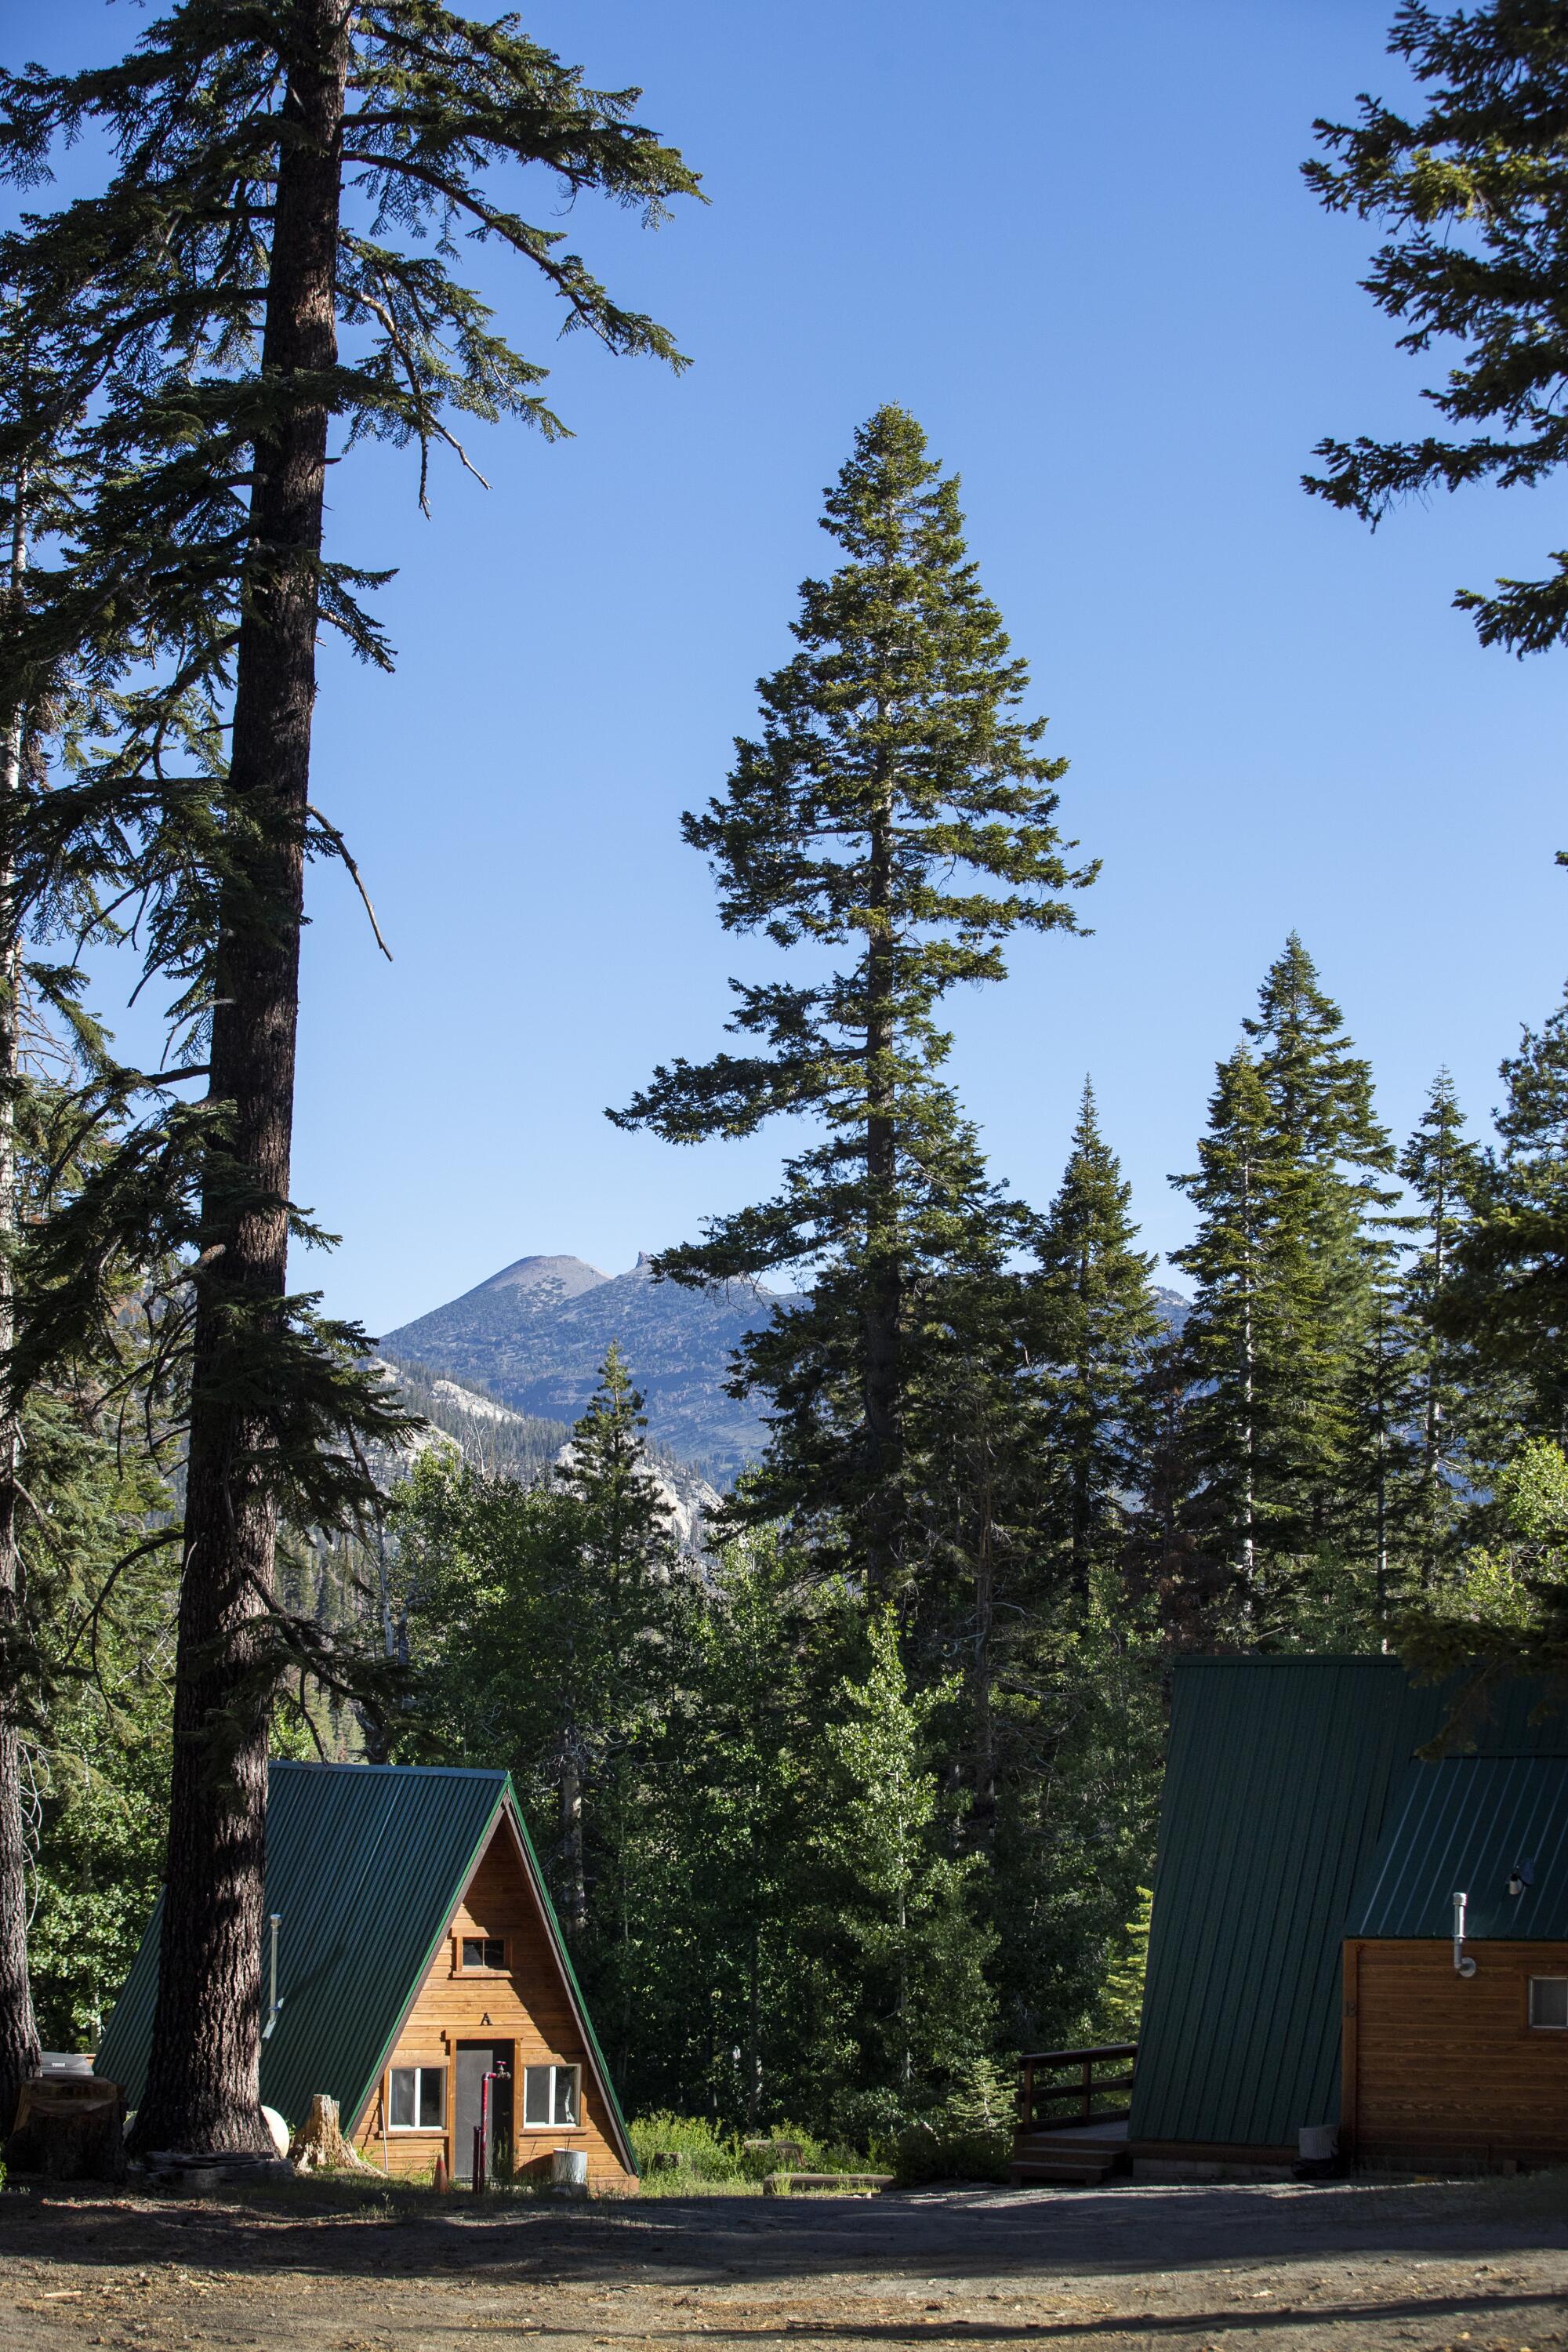 Trees tower above an A-frame cabin.